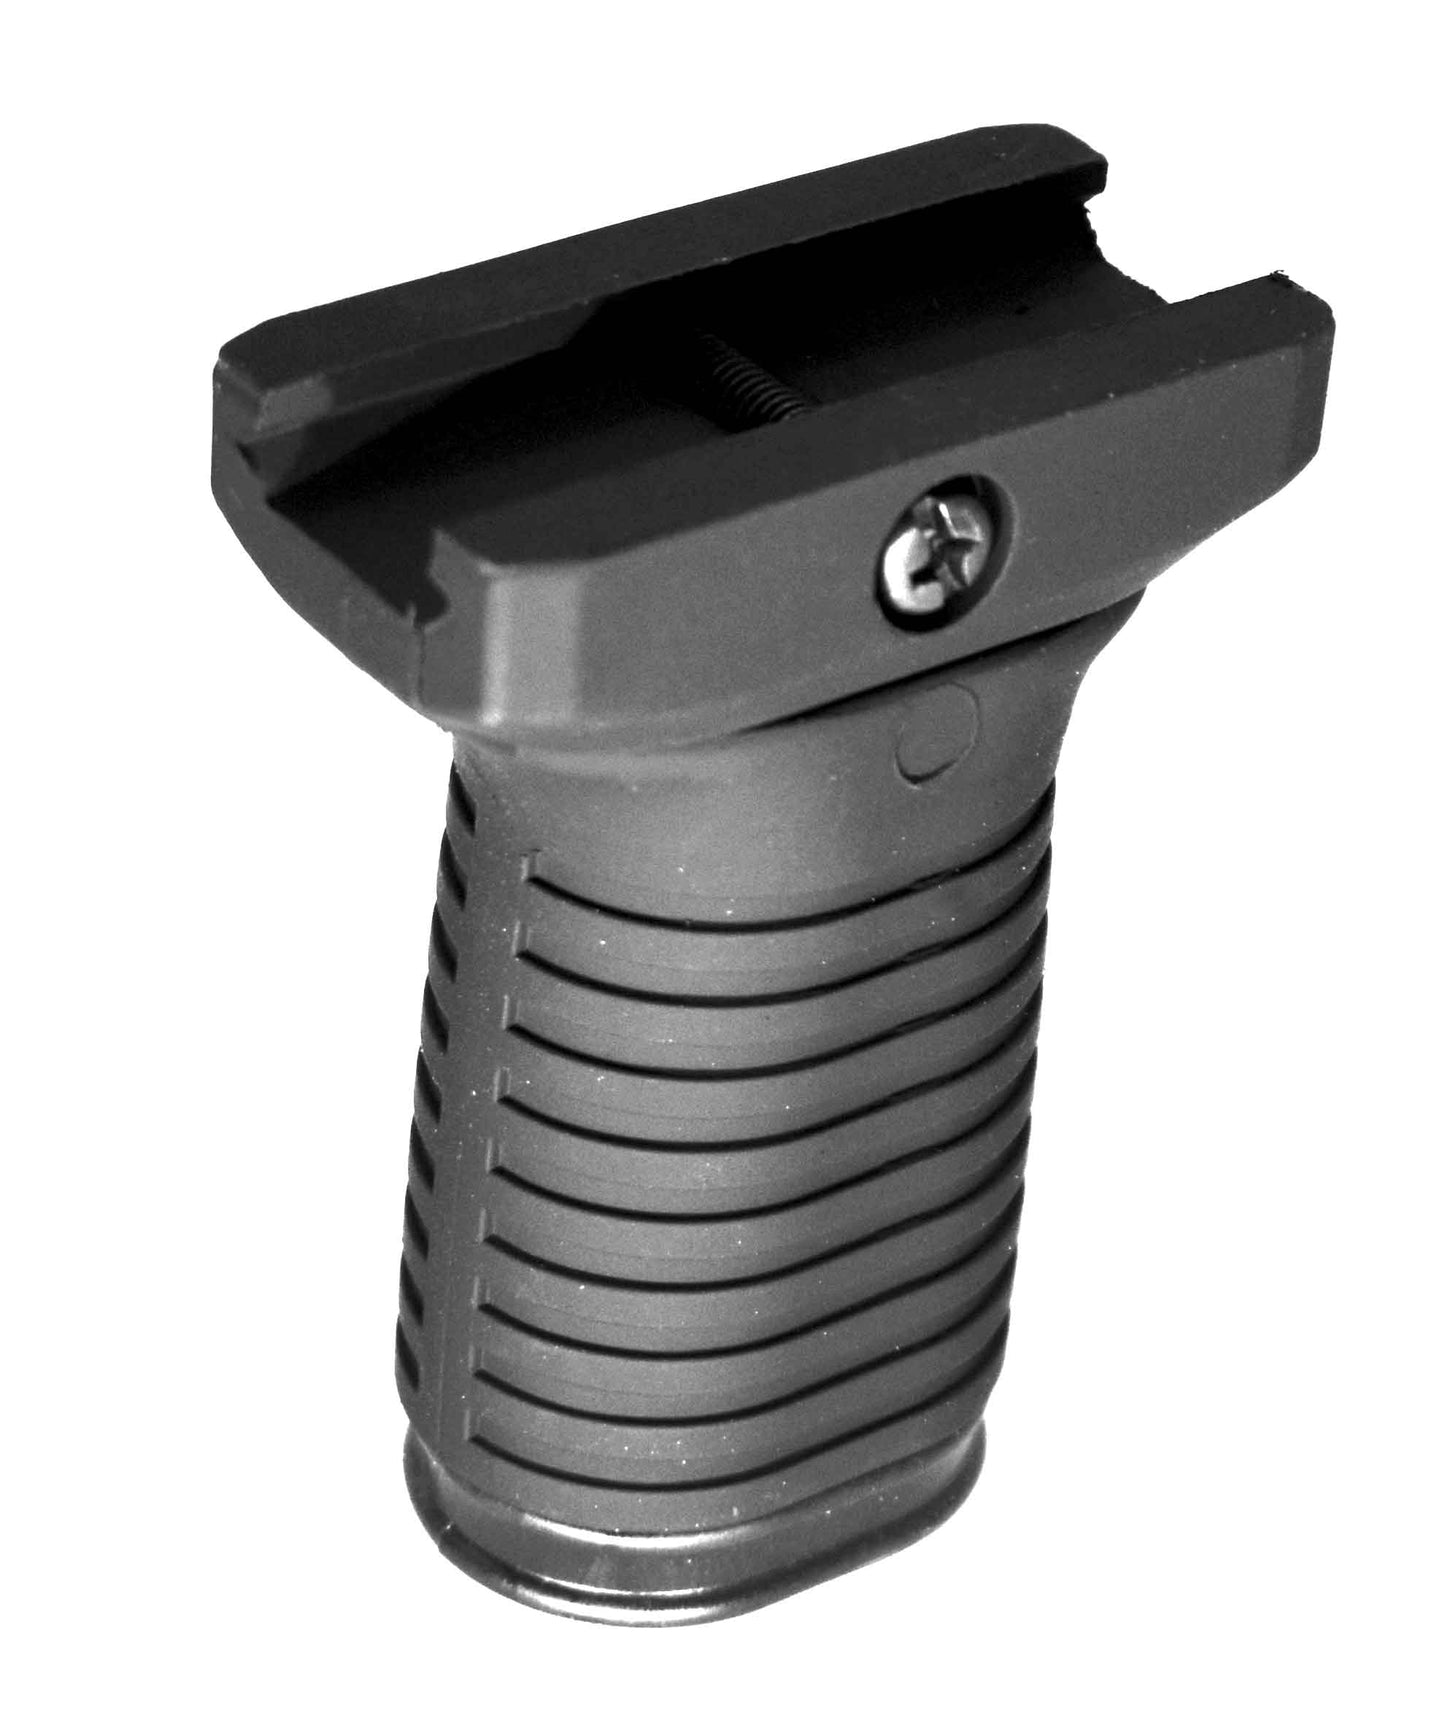 tactical vertical grip for rifles and shotguns.